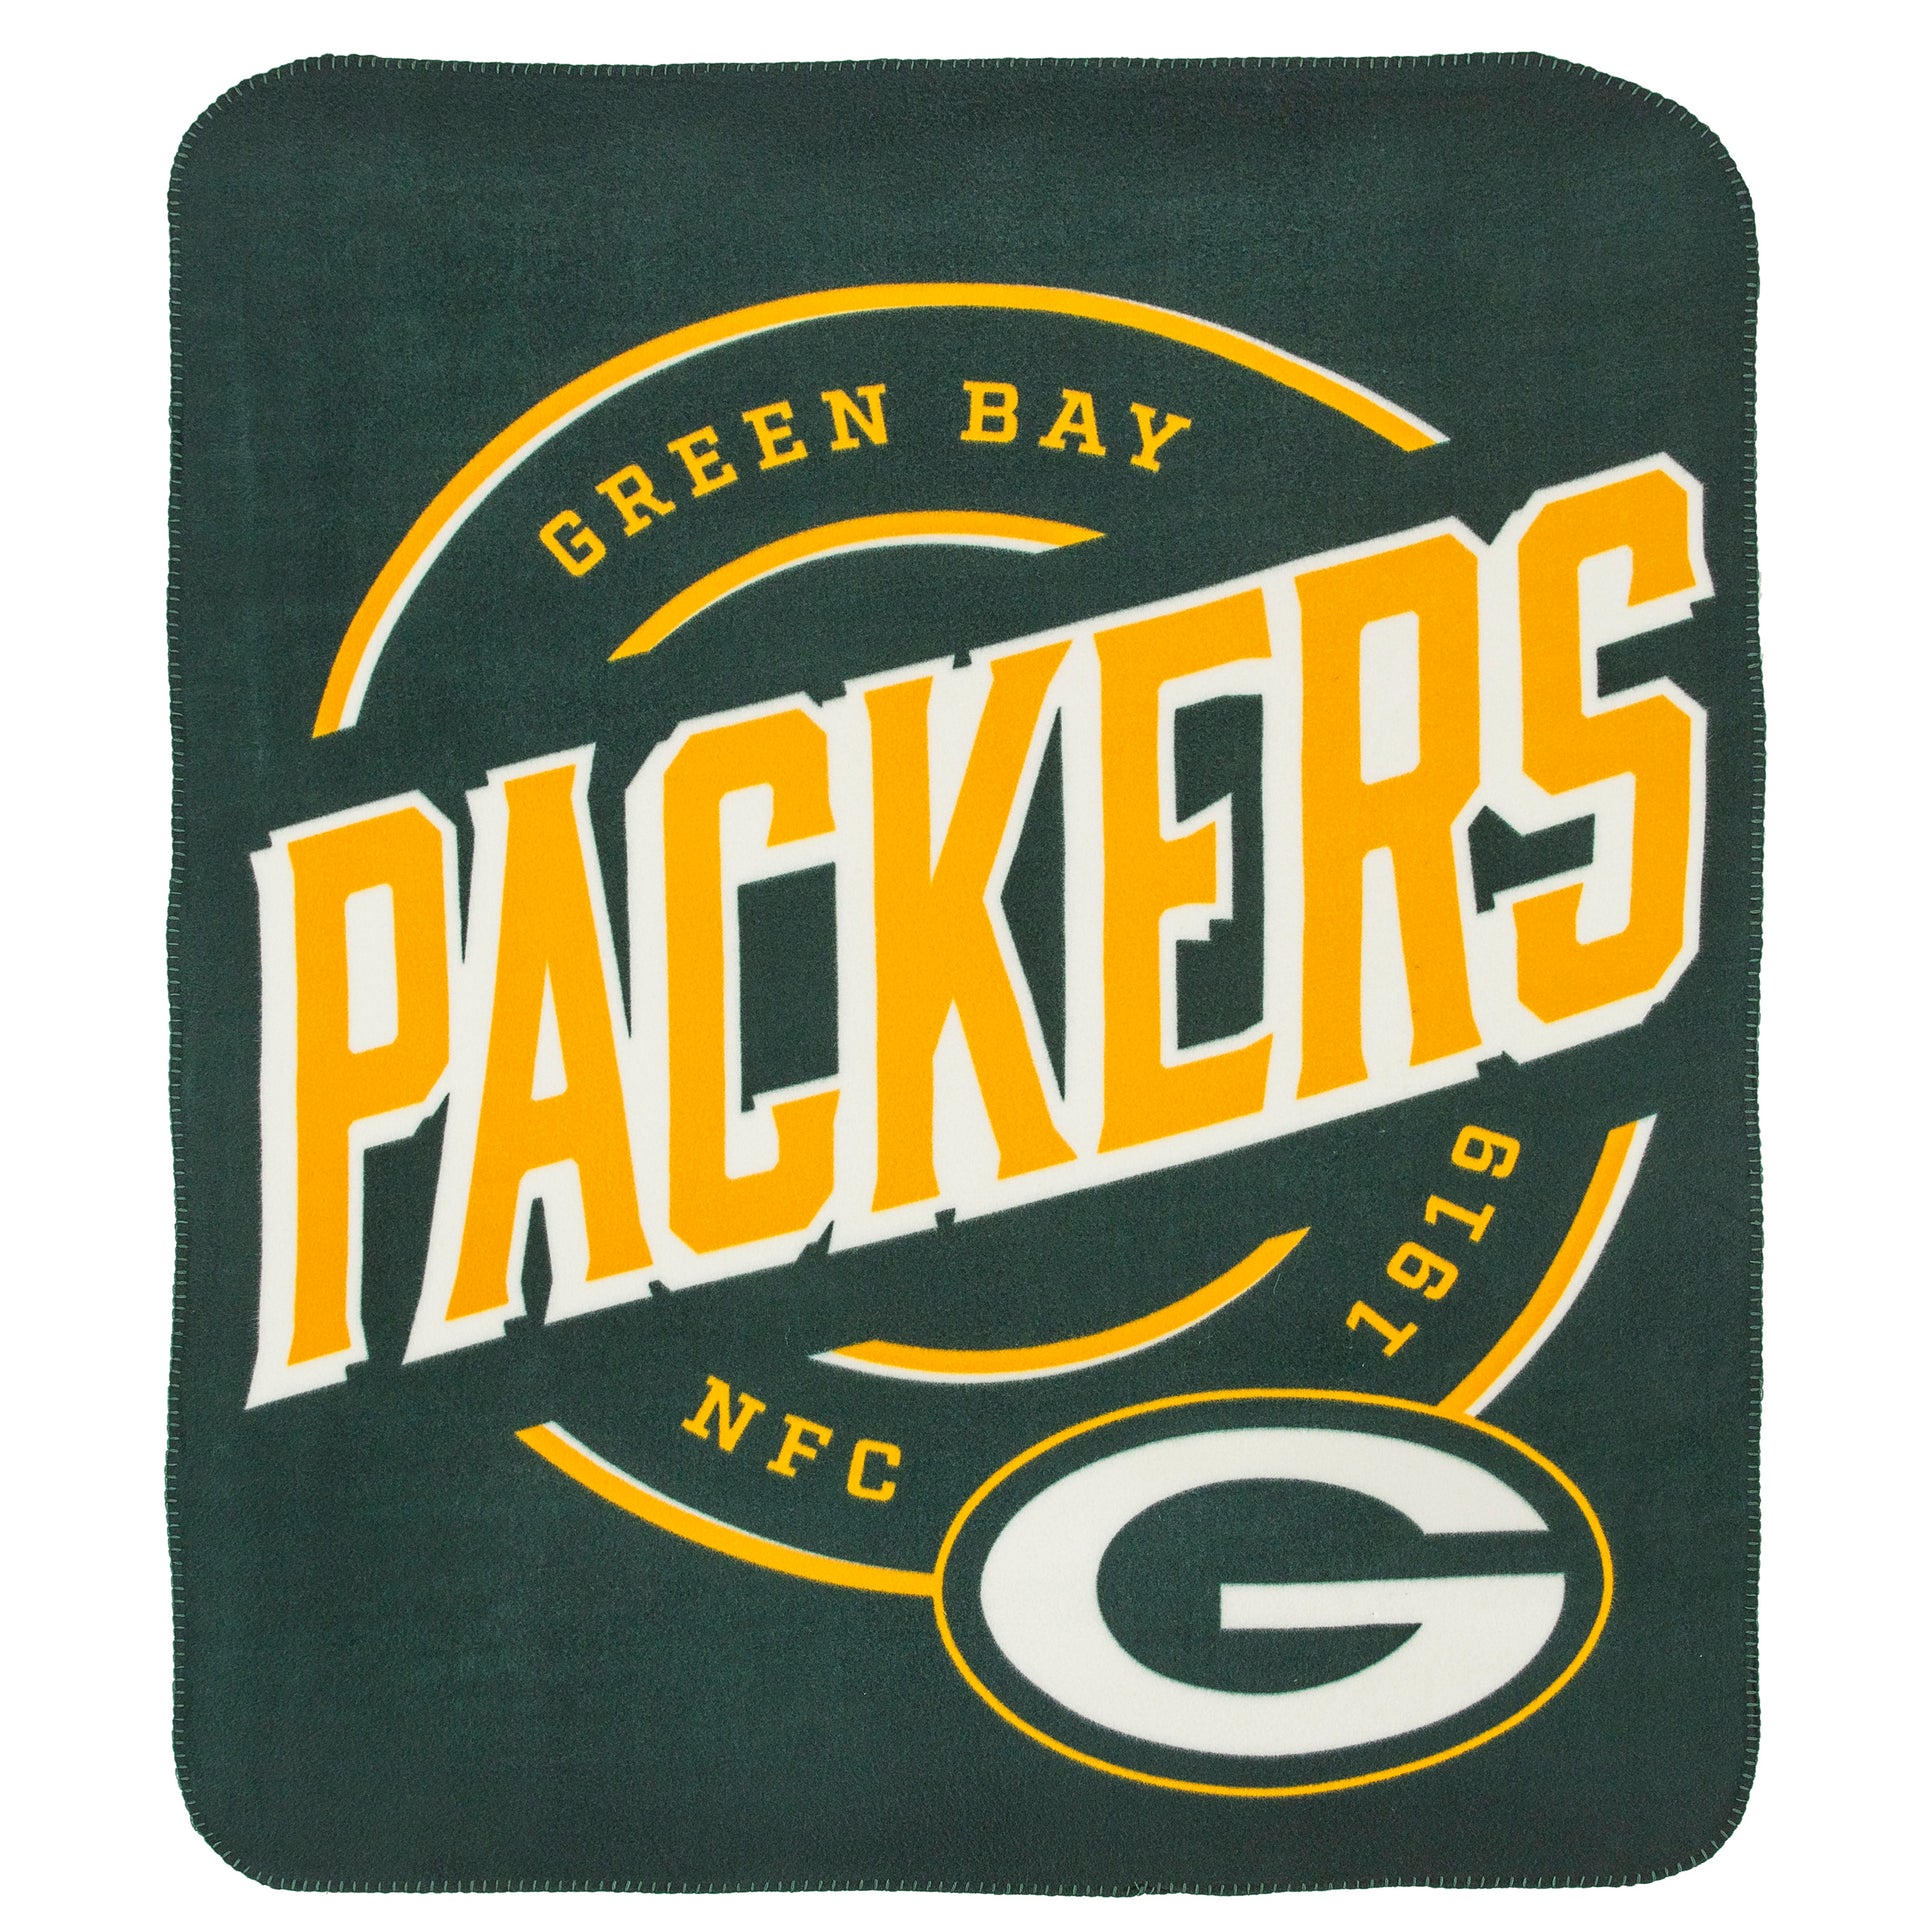 Green Bay Packers 50" x 60" Campaign Fleece Blanket - Dynasty Sports & Framing 